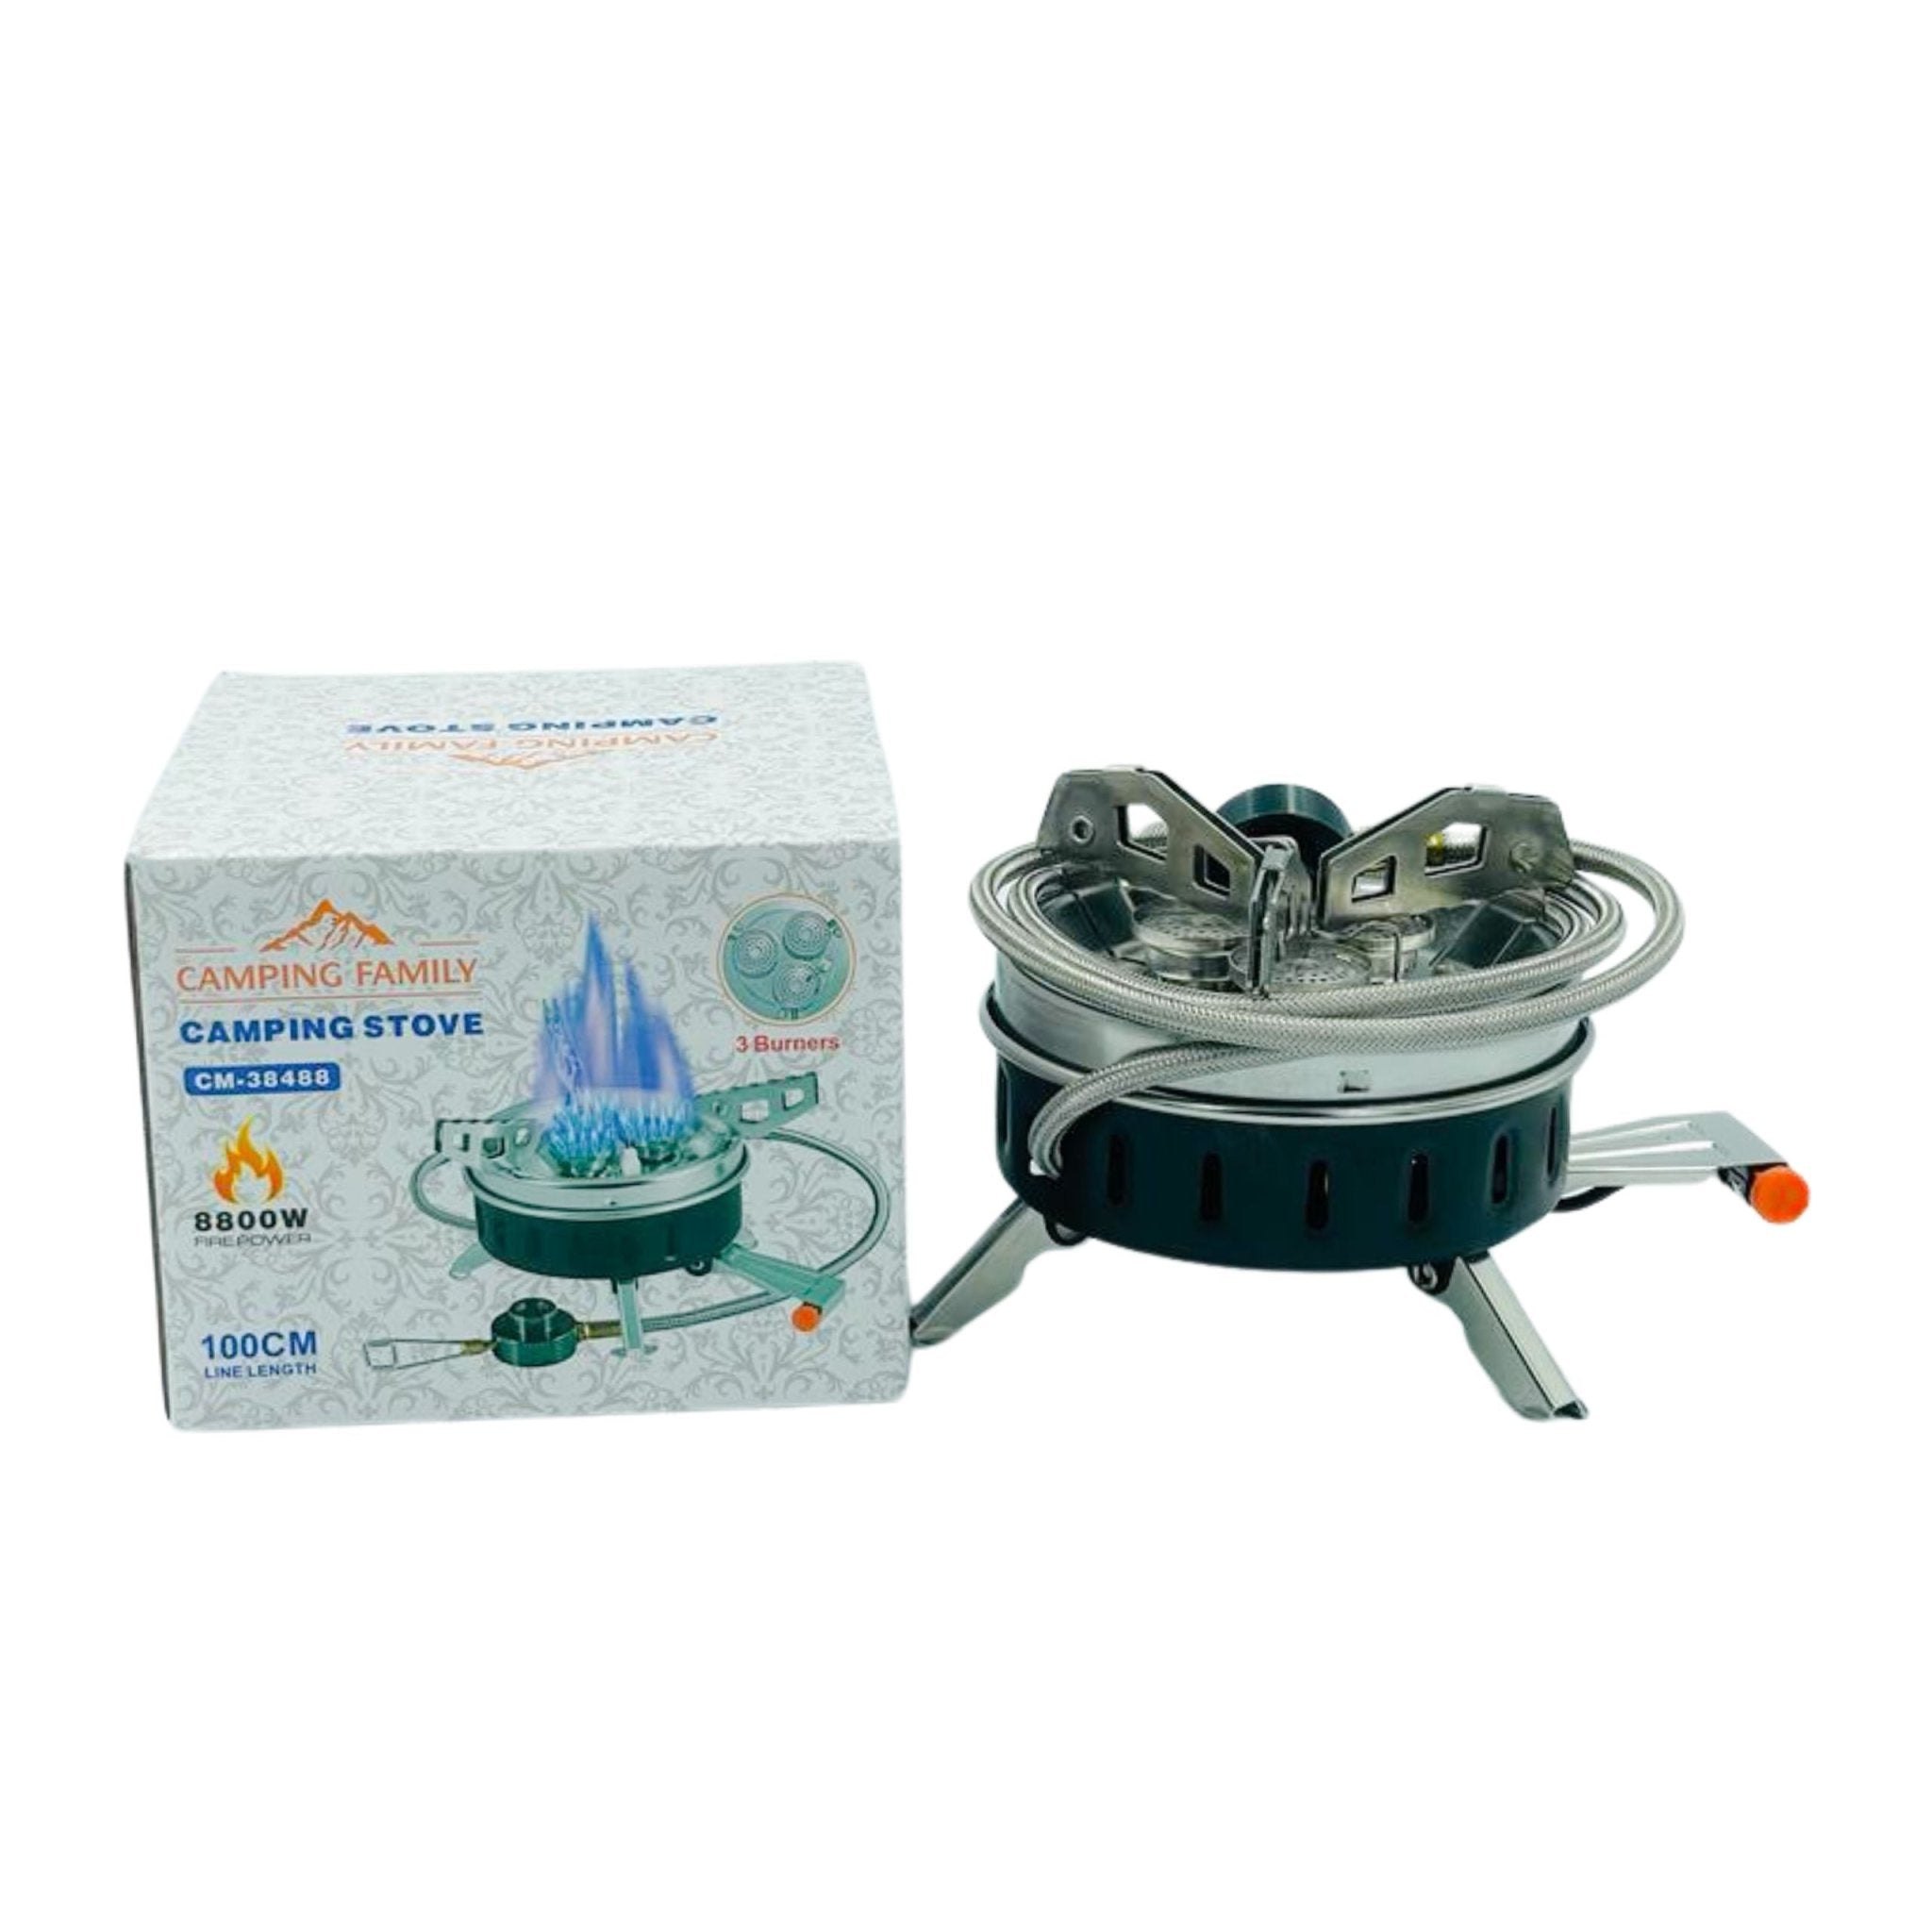 Camping Family Camping Stove 3 Burners 88000W CM-38488 - Black